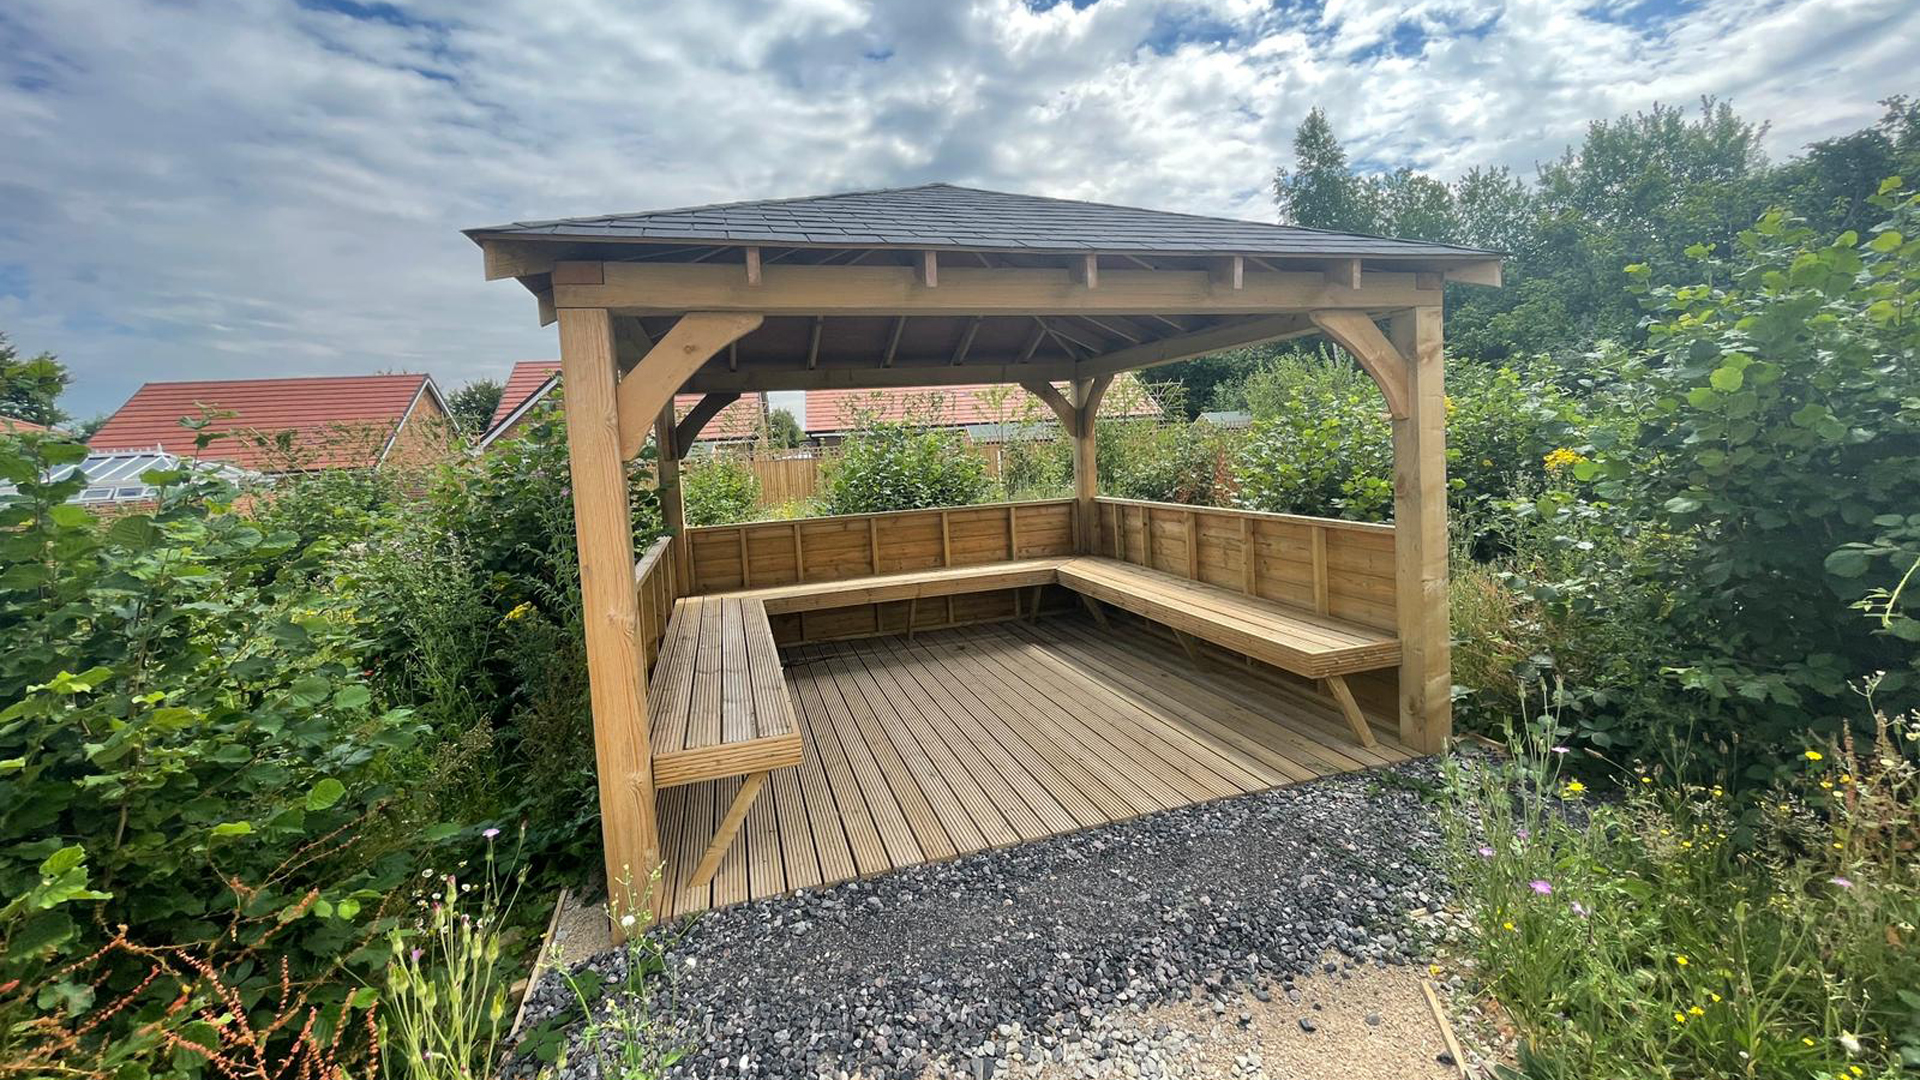 wooden gazebo seating area surrounded by wildflower